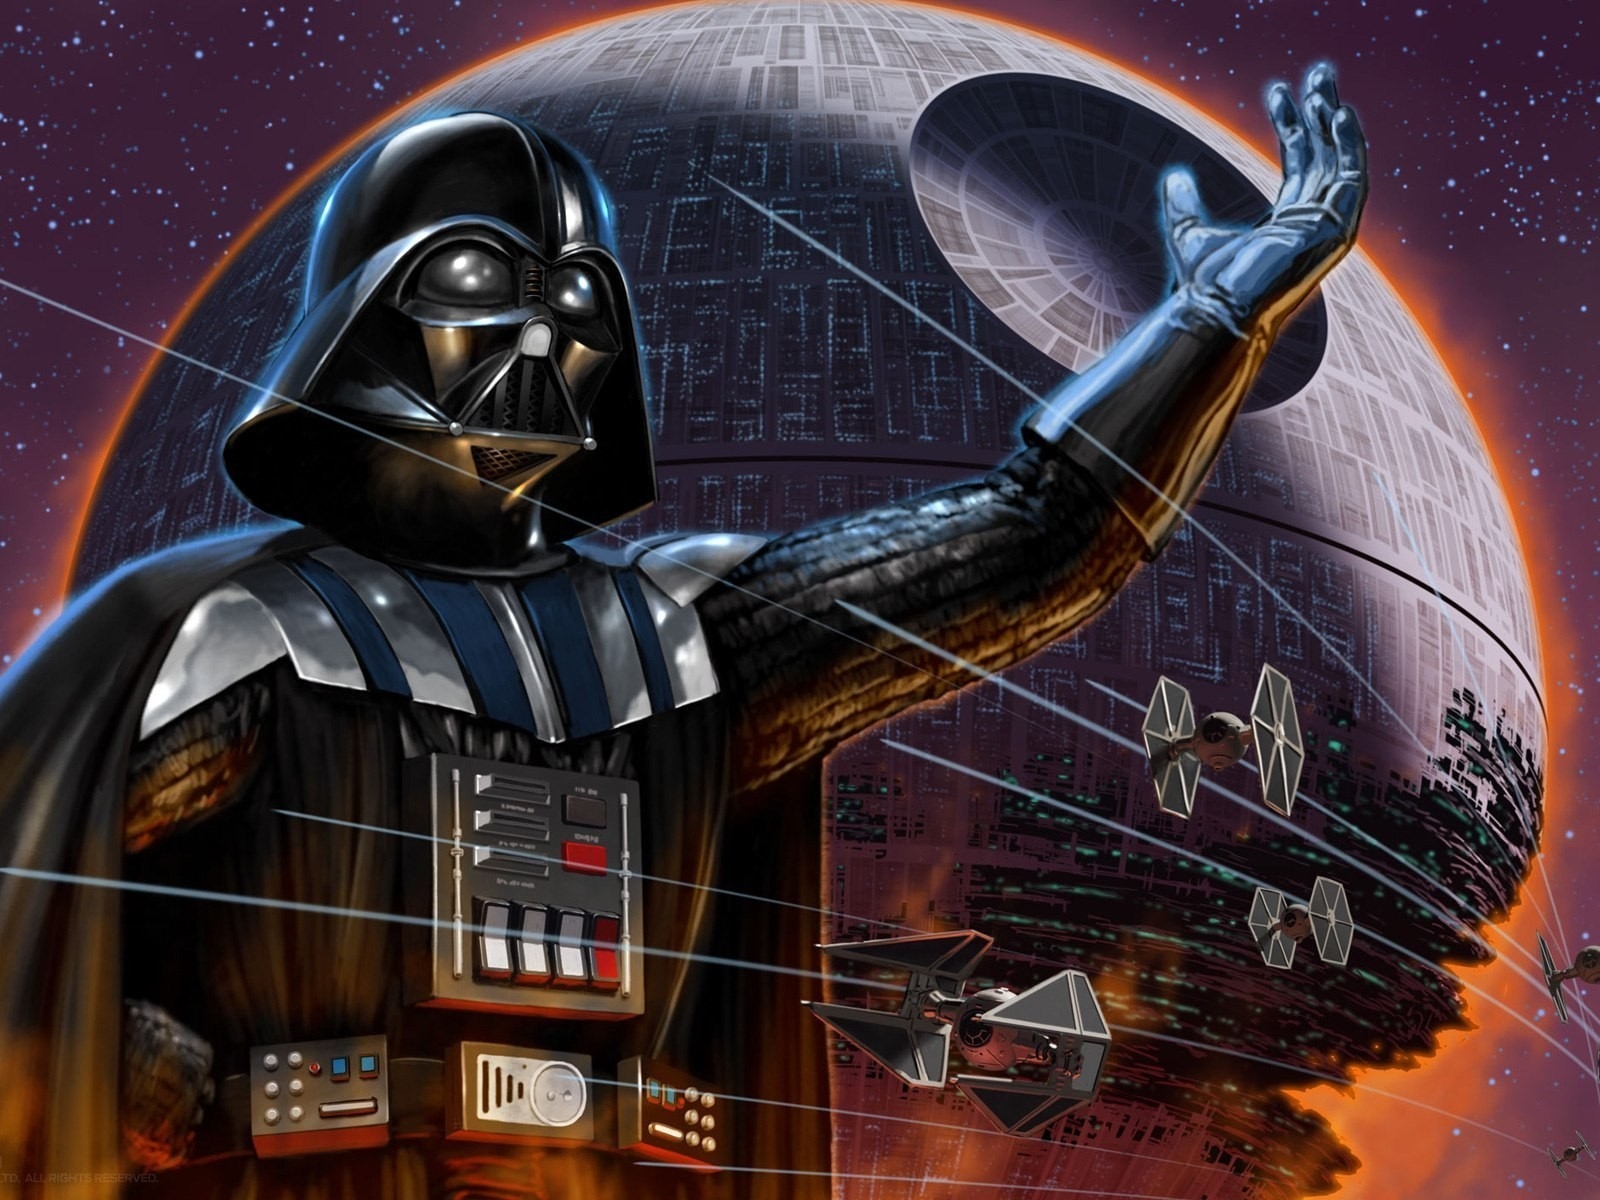 Darth Vader Star Wars Character for 1600 x 1200 resolution